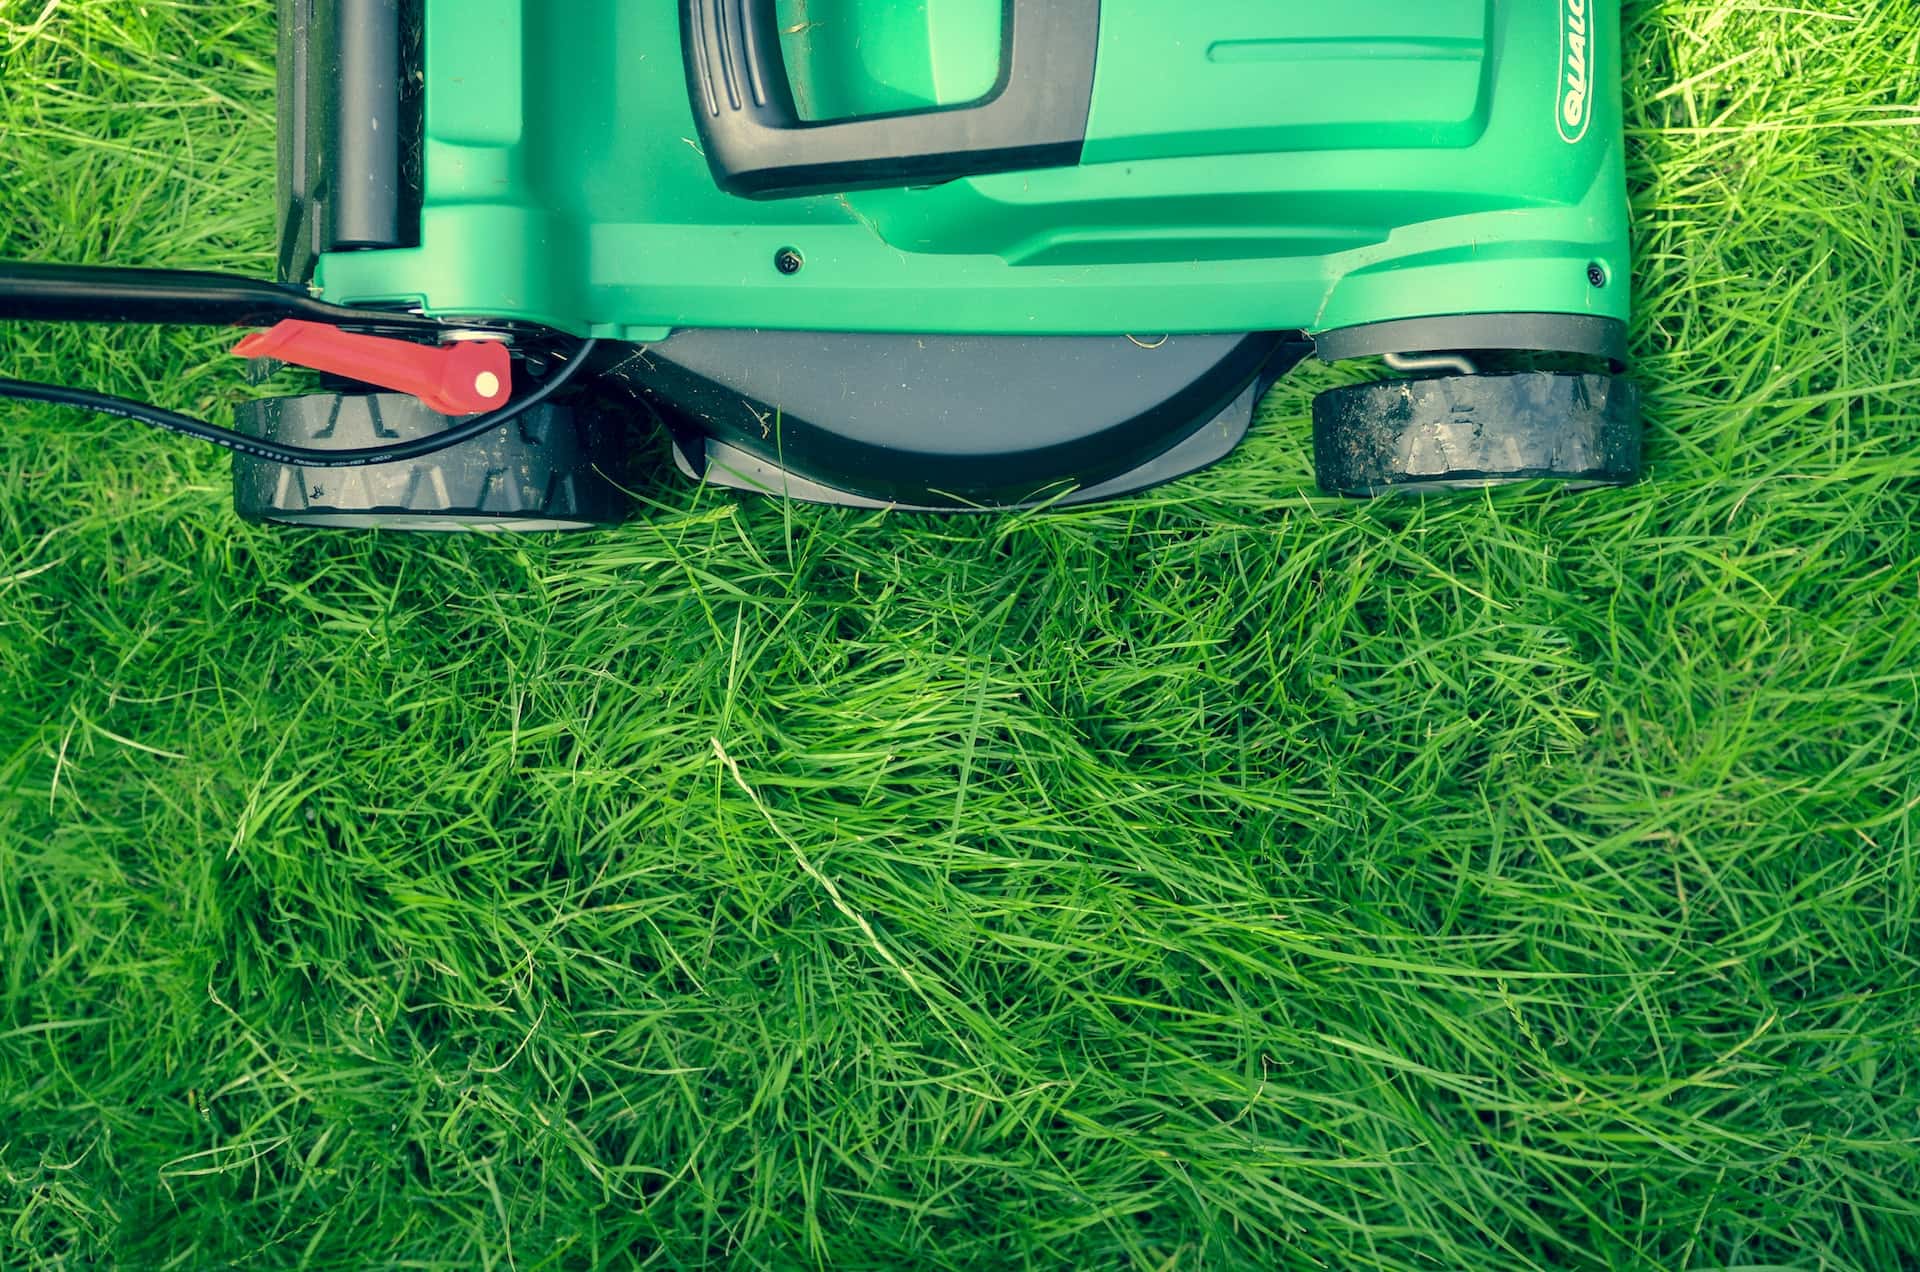 Mowing the lawn in the summer – why give it up?